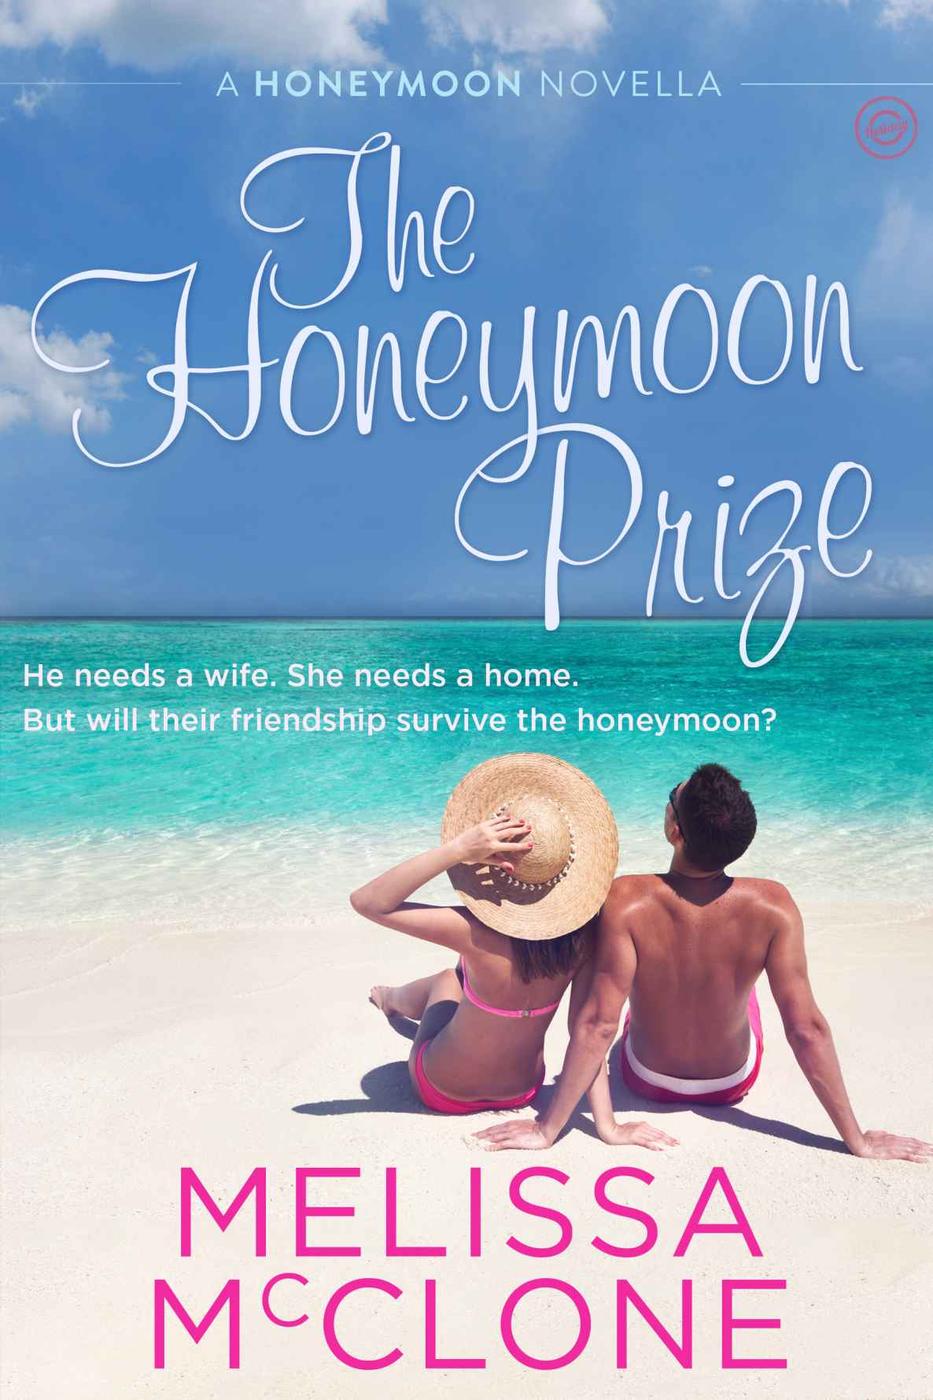 The Honeymoon Prize by Melissa McClone